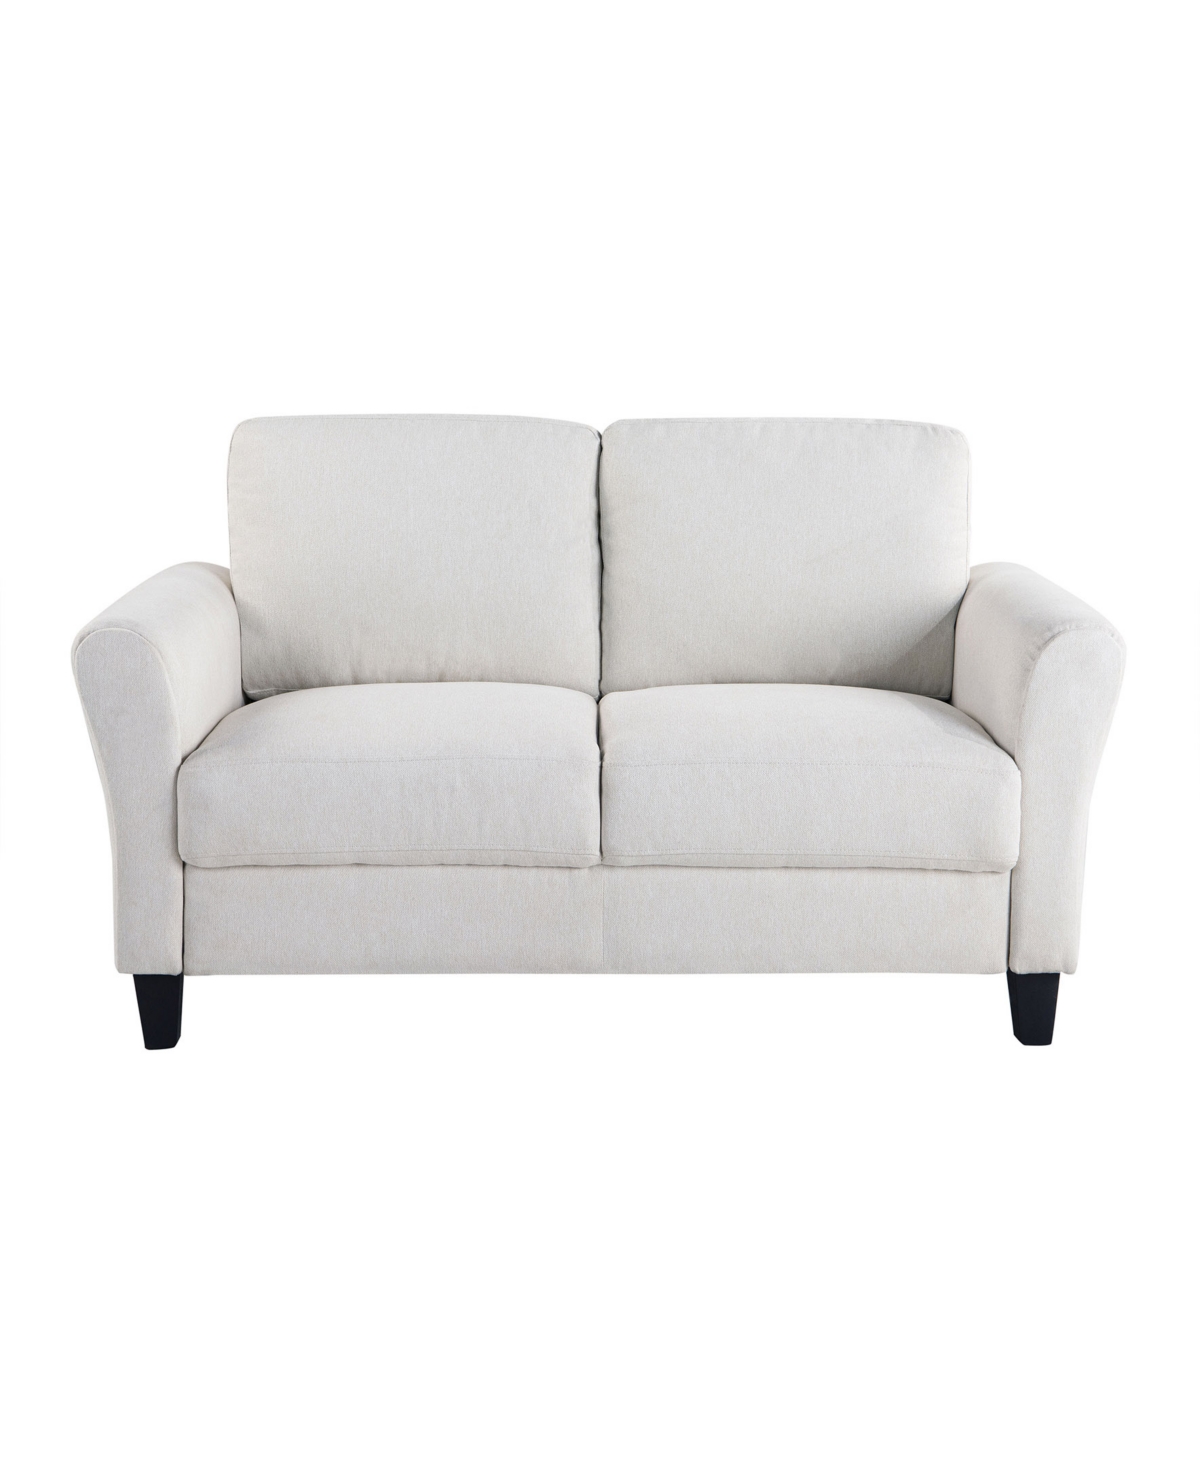 Lifestyle Solutions 57.9" Microfiber Wilshire Loveseat With Rolled Arms In Oyster